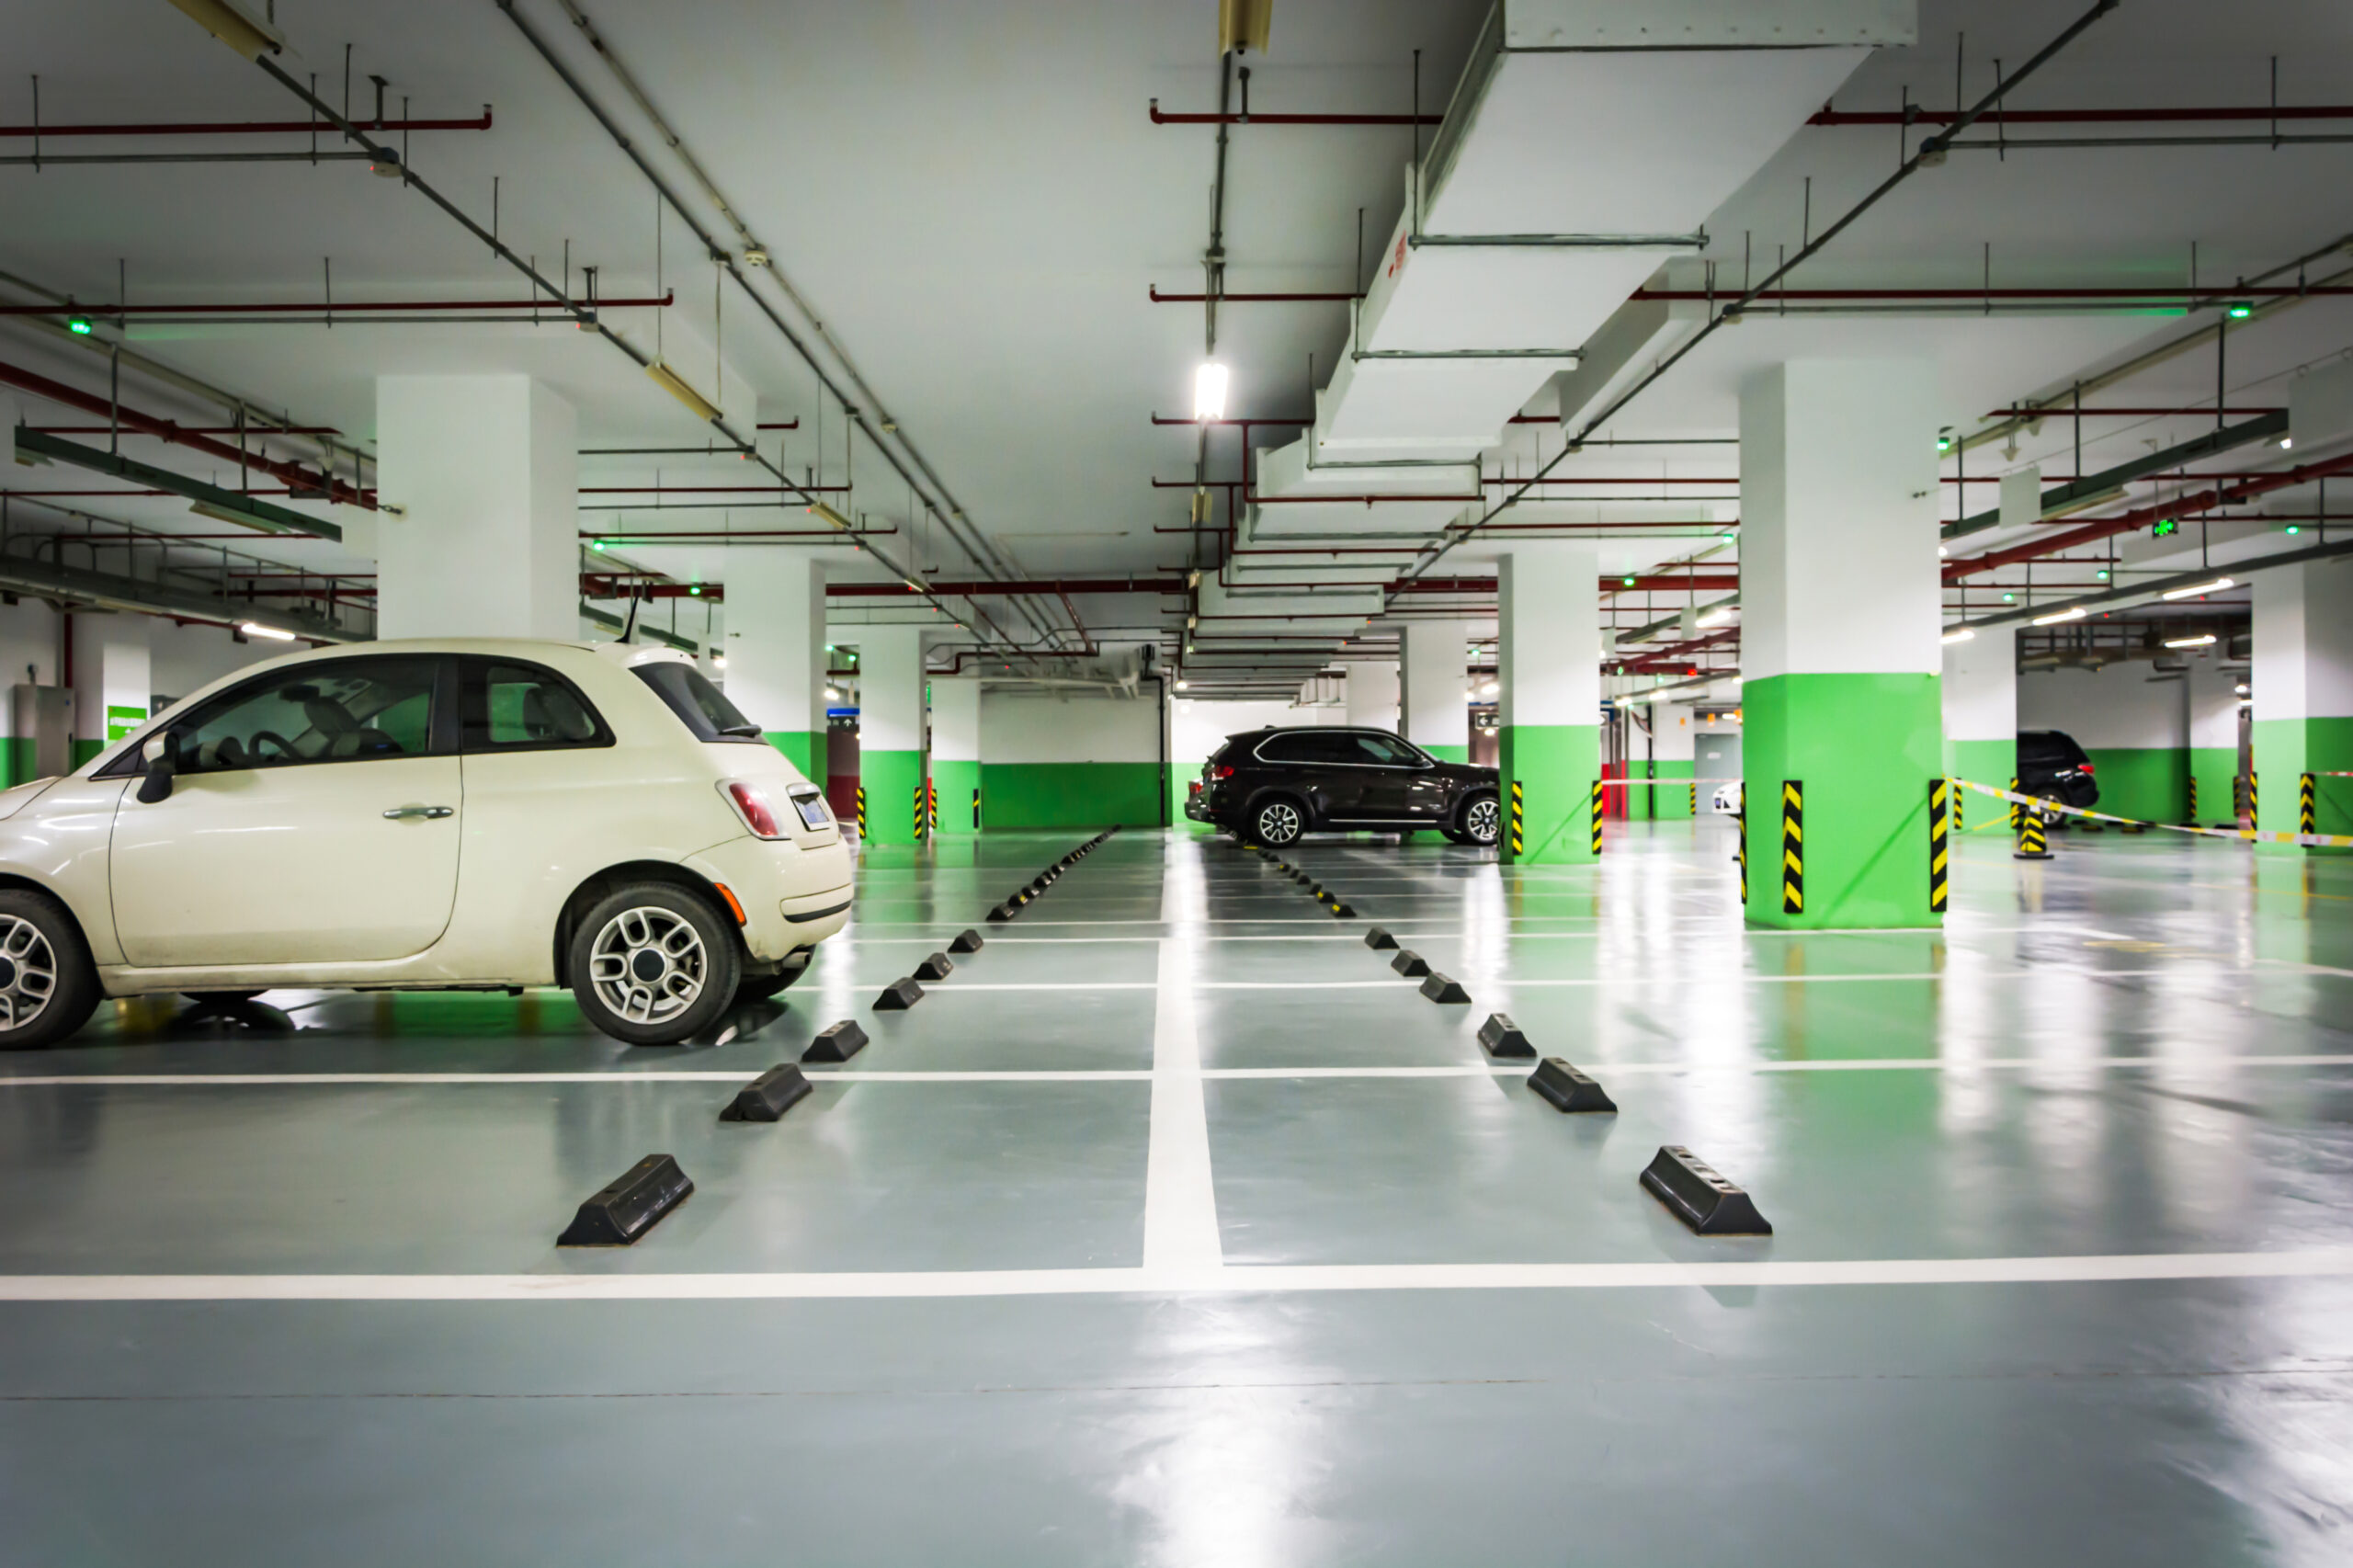 How Smart parking solves the problem of parking spaces.